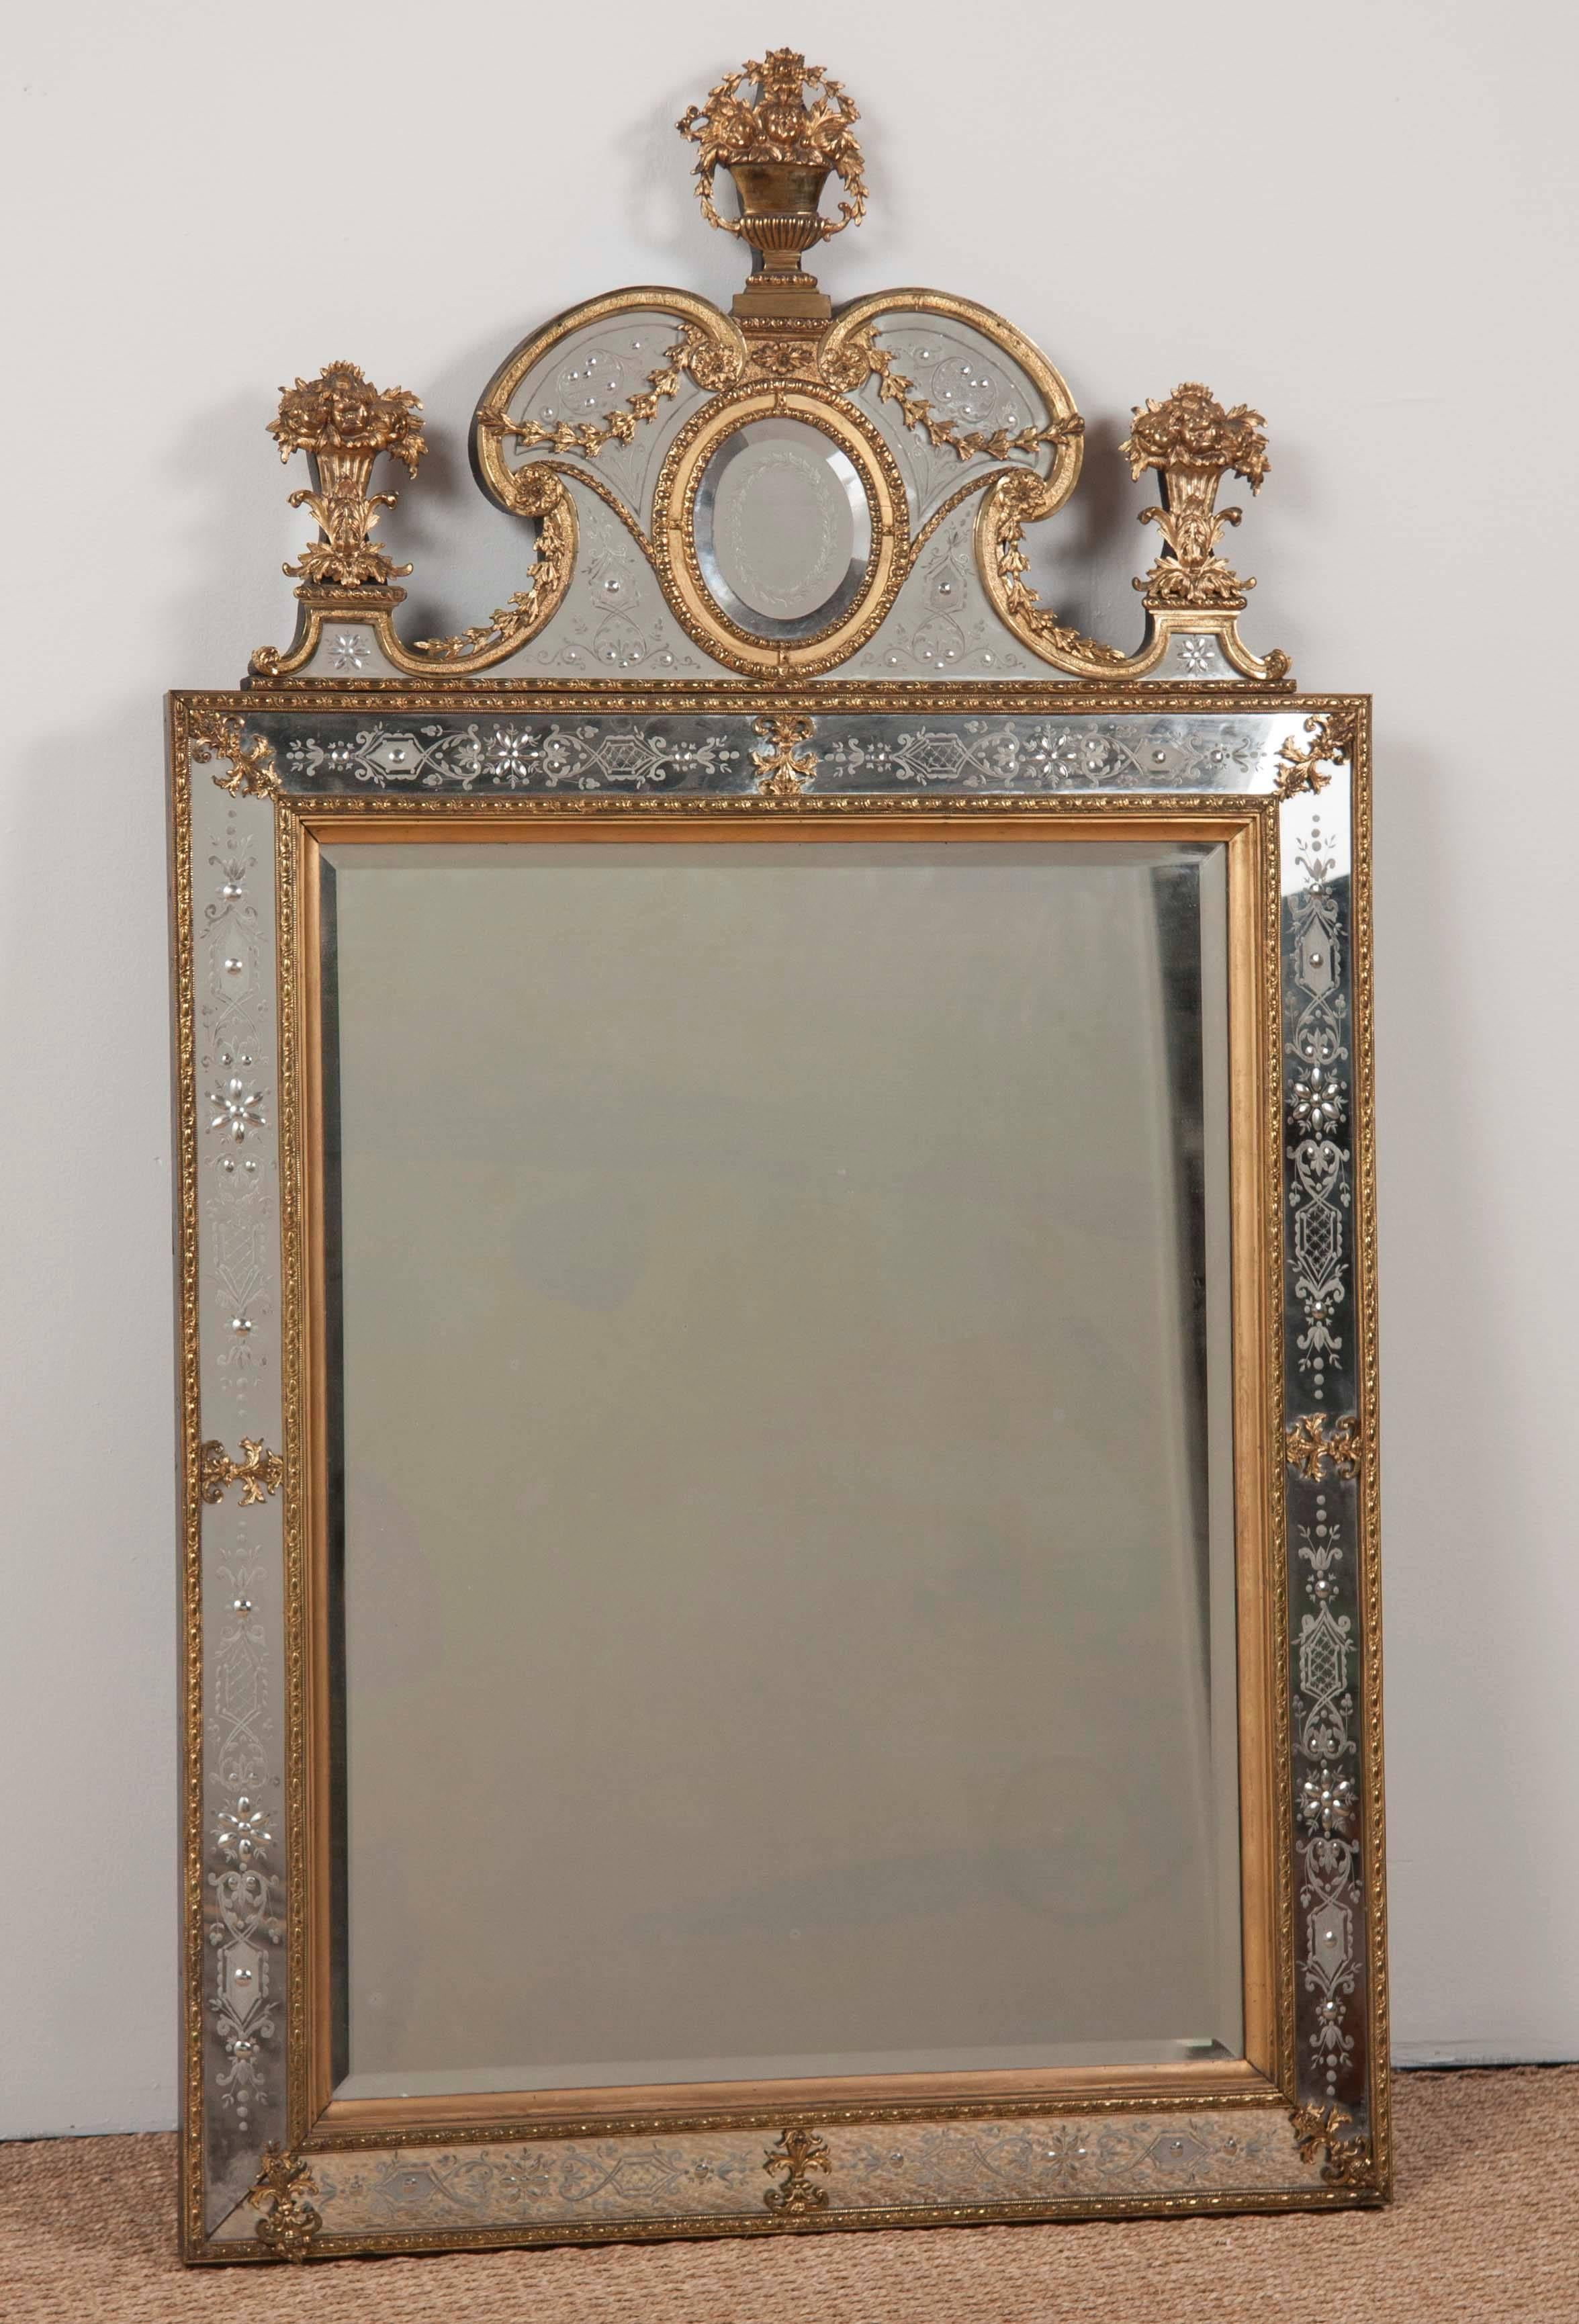 A Matched pair of Swedish ormolu-mounted and Etched glass mirrors after the model by Gustav Precht, second half of the 19th century.
 The rectangular plate within a beveled foliate-decorated surround with foliate clasps, the C-scroll arched